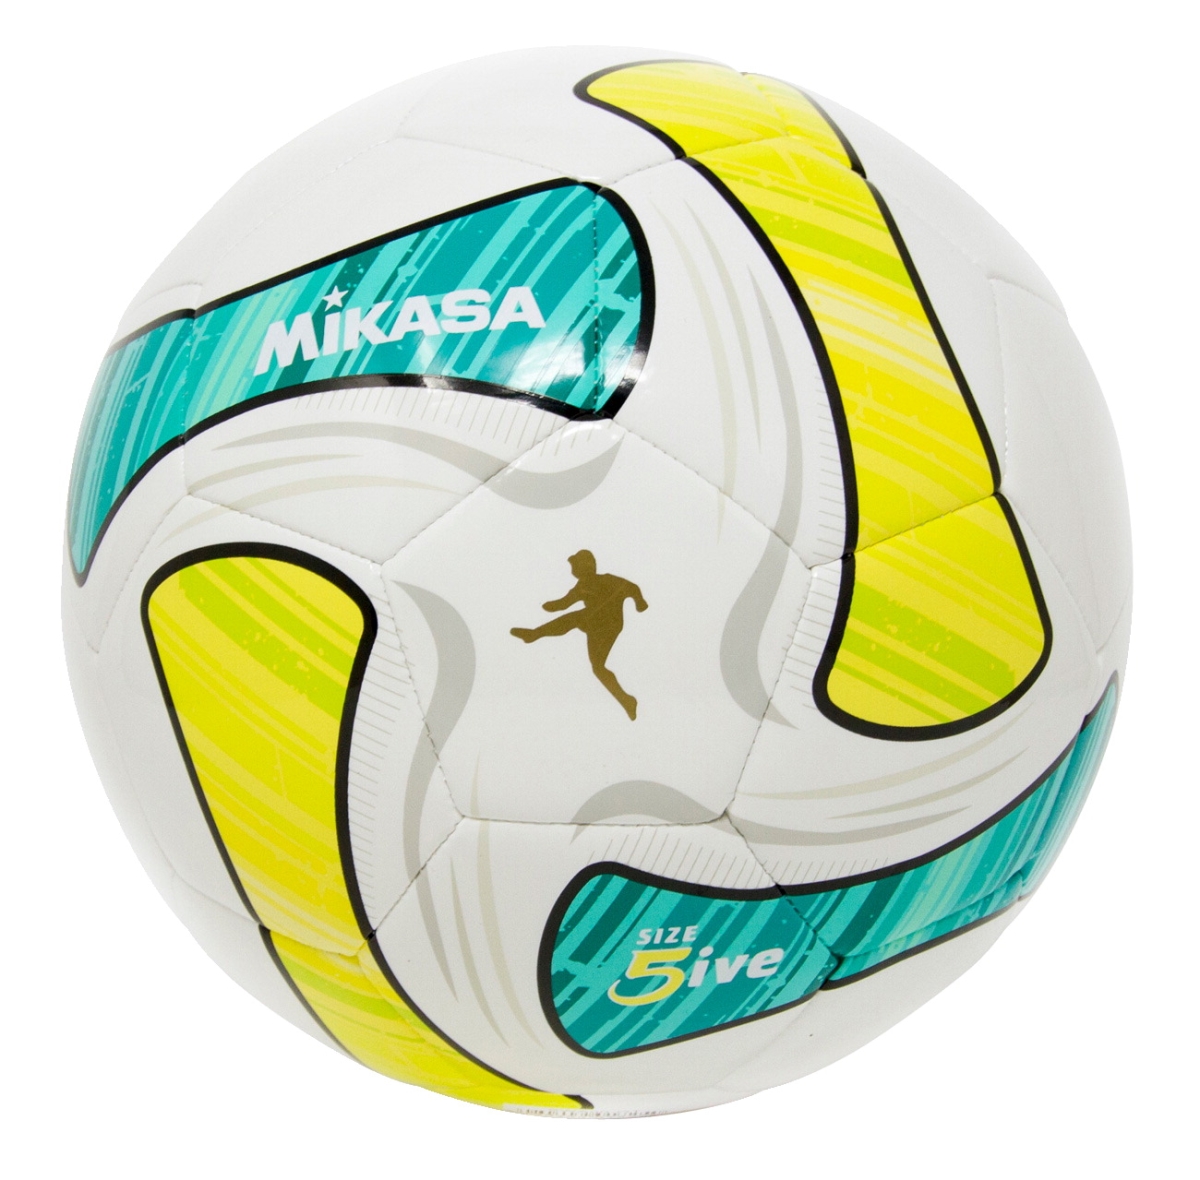 2003094 Swa Series Soccer Ball, White, Green & Teal - Size 5